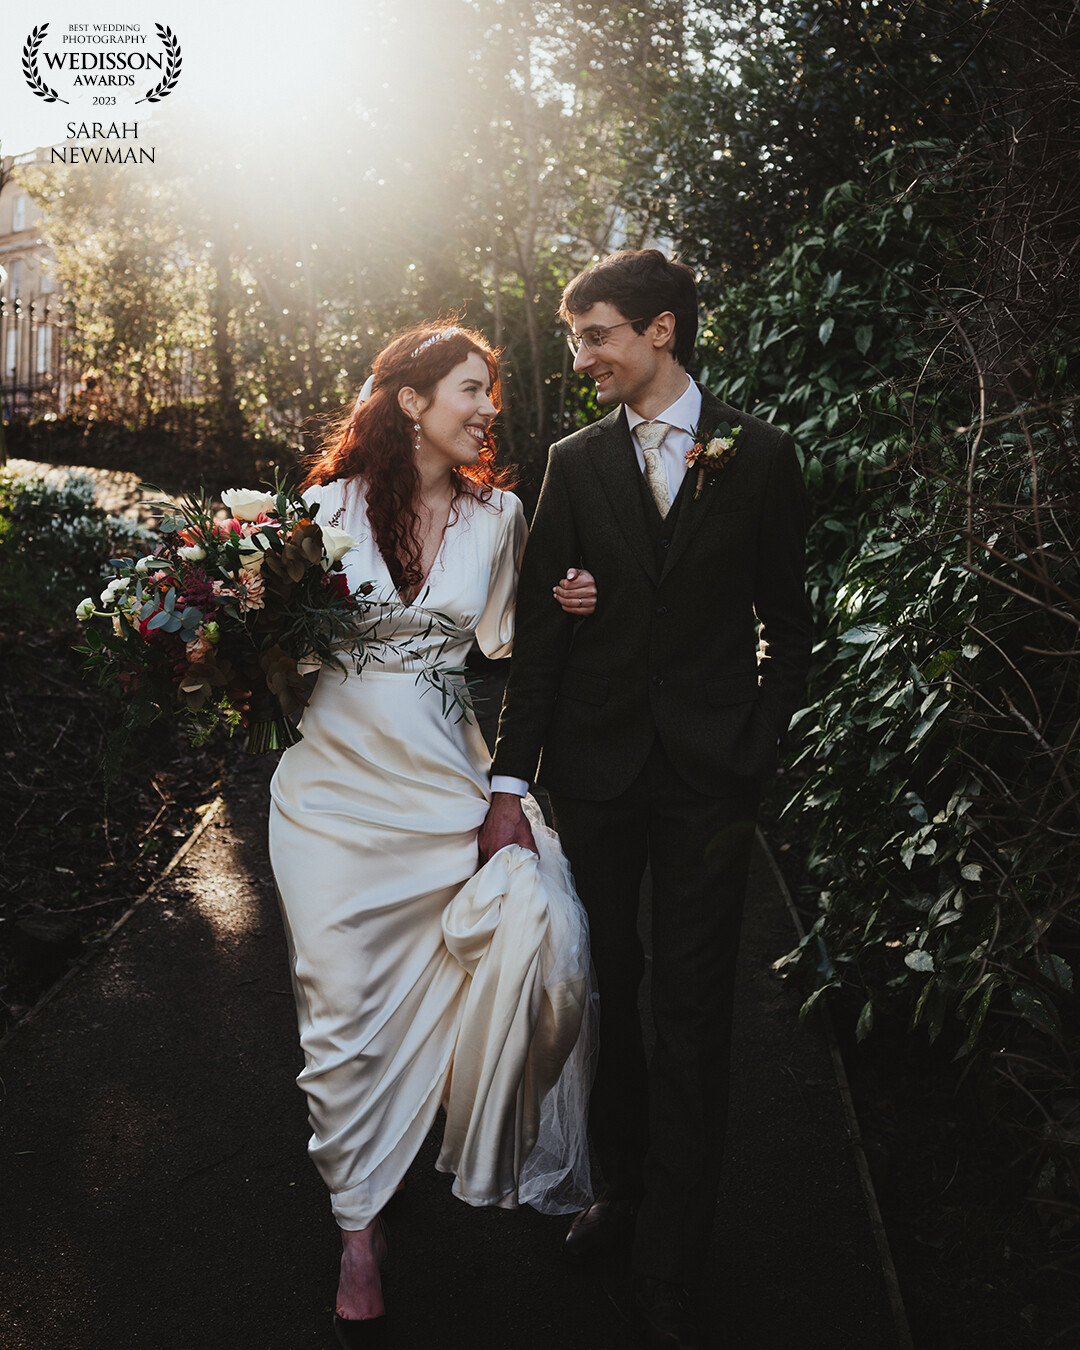 Margaux and Dennis from their wedding at The Royal College of Physicians in Edinburgh, taking a stroll for photos in Queen Street private gardens during sunset!